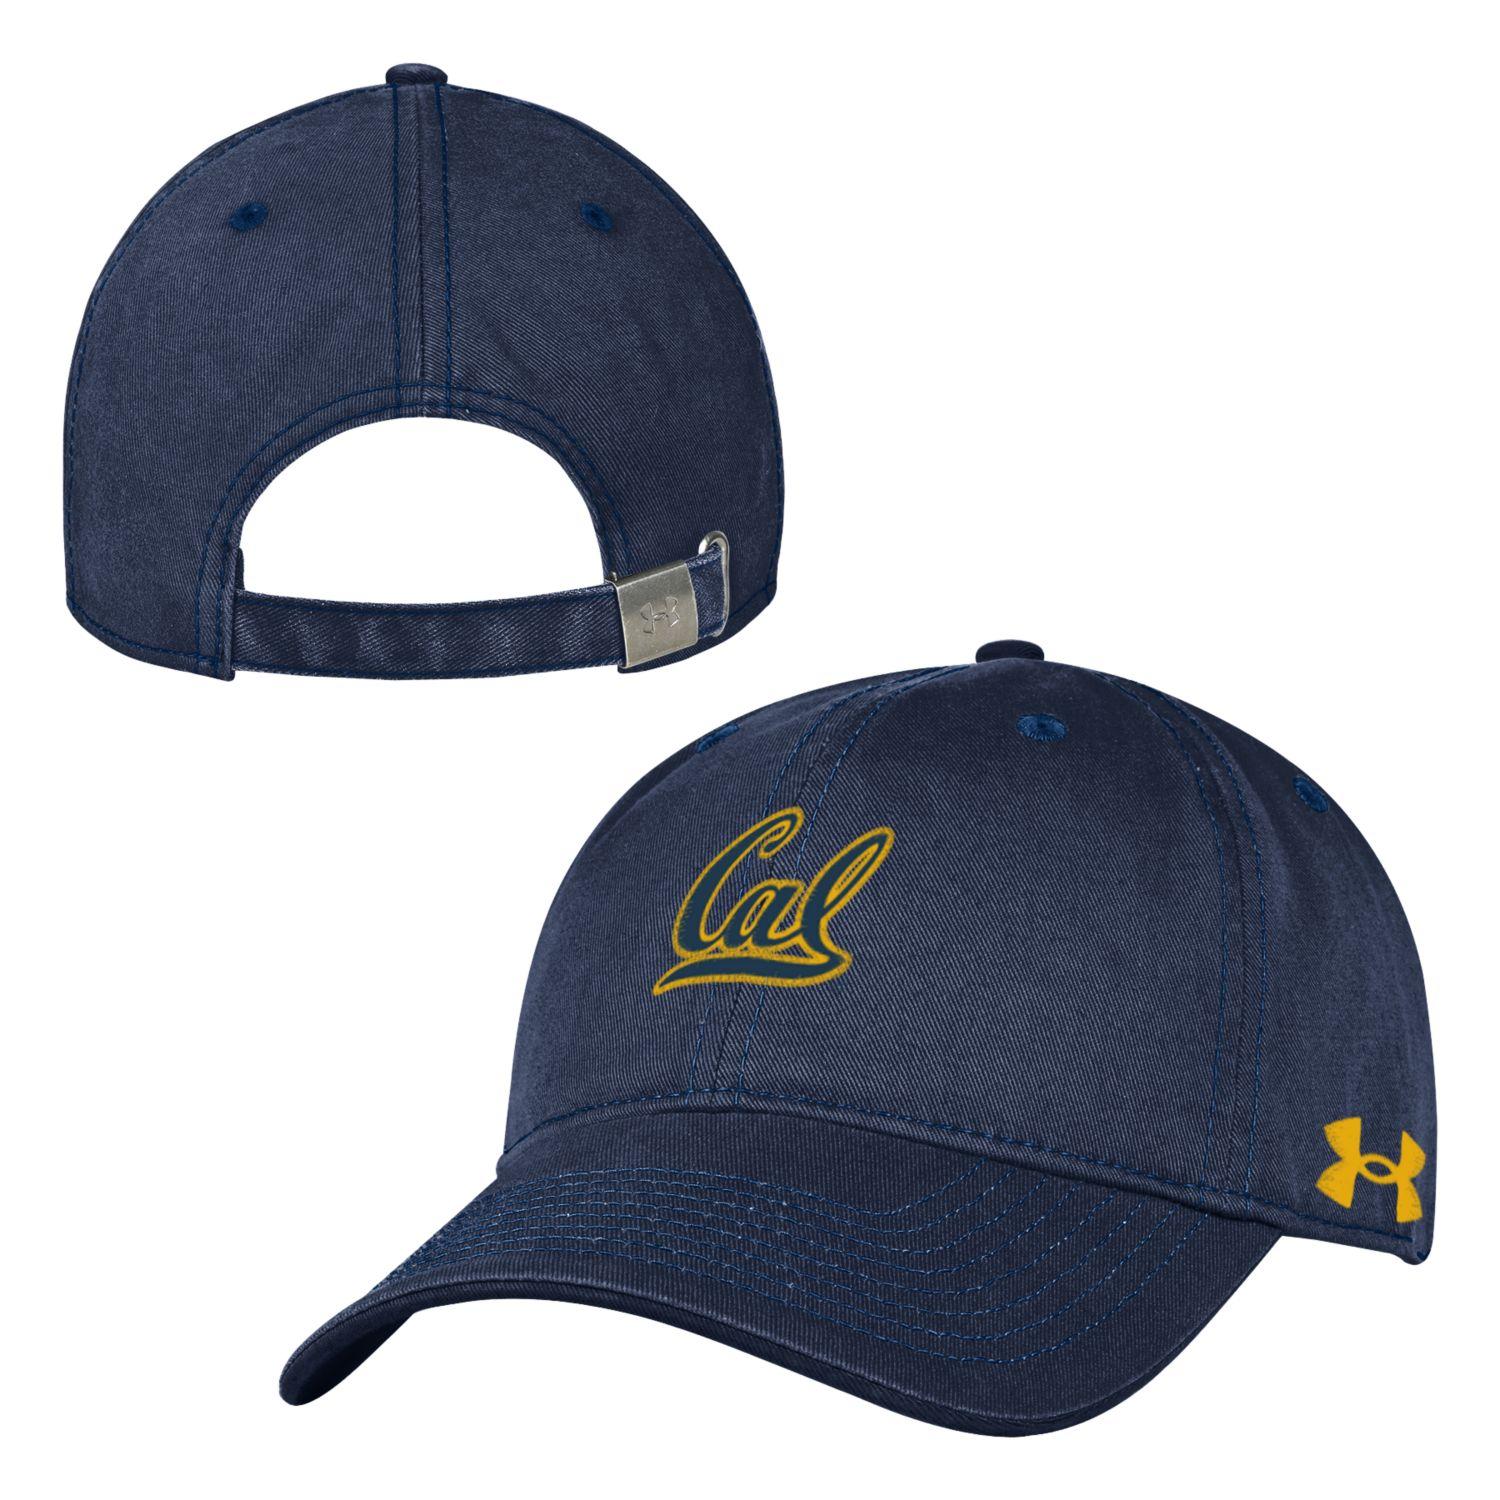 U.C. Berkeley 2cal Embroidered Under Armour Performance Cotton Hat in Navy Blue | Men's